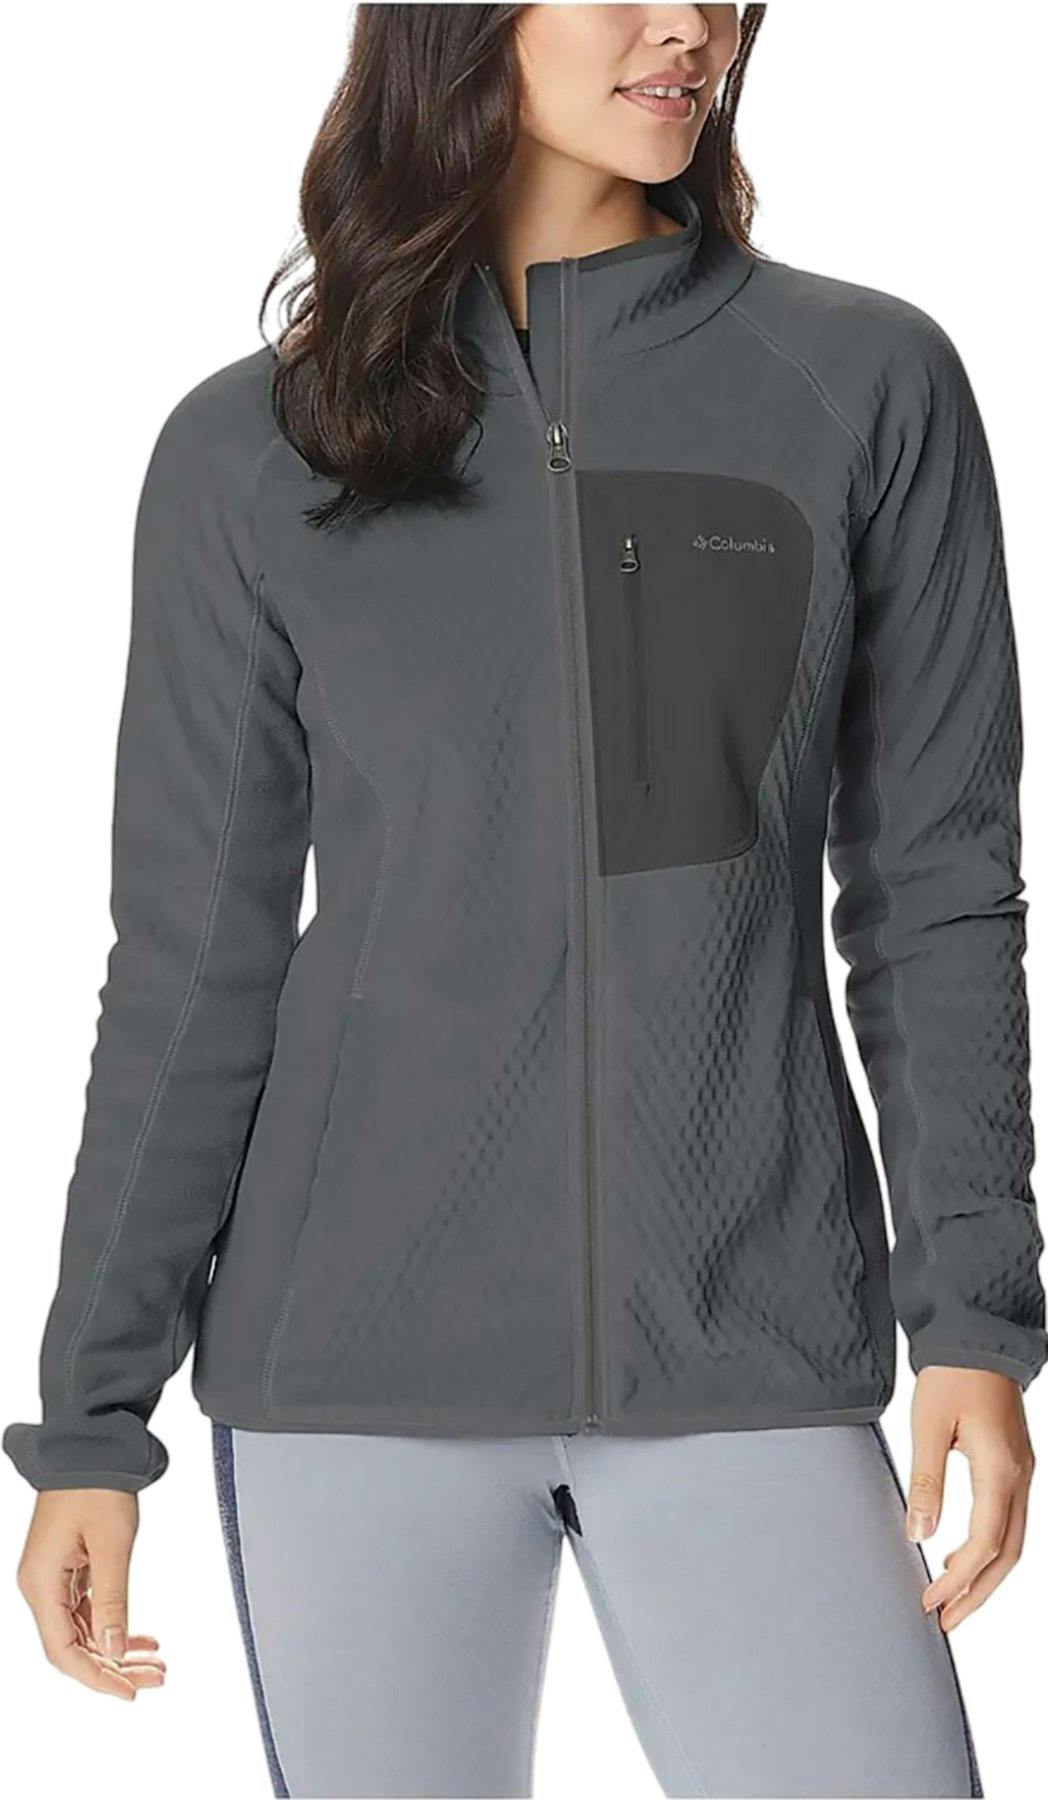 Product image for Outdoor Tracks Hooded Full Zip Jacket - Women's